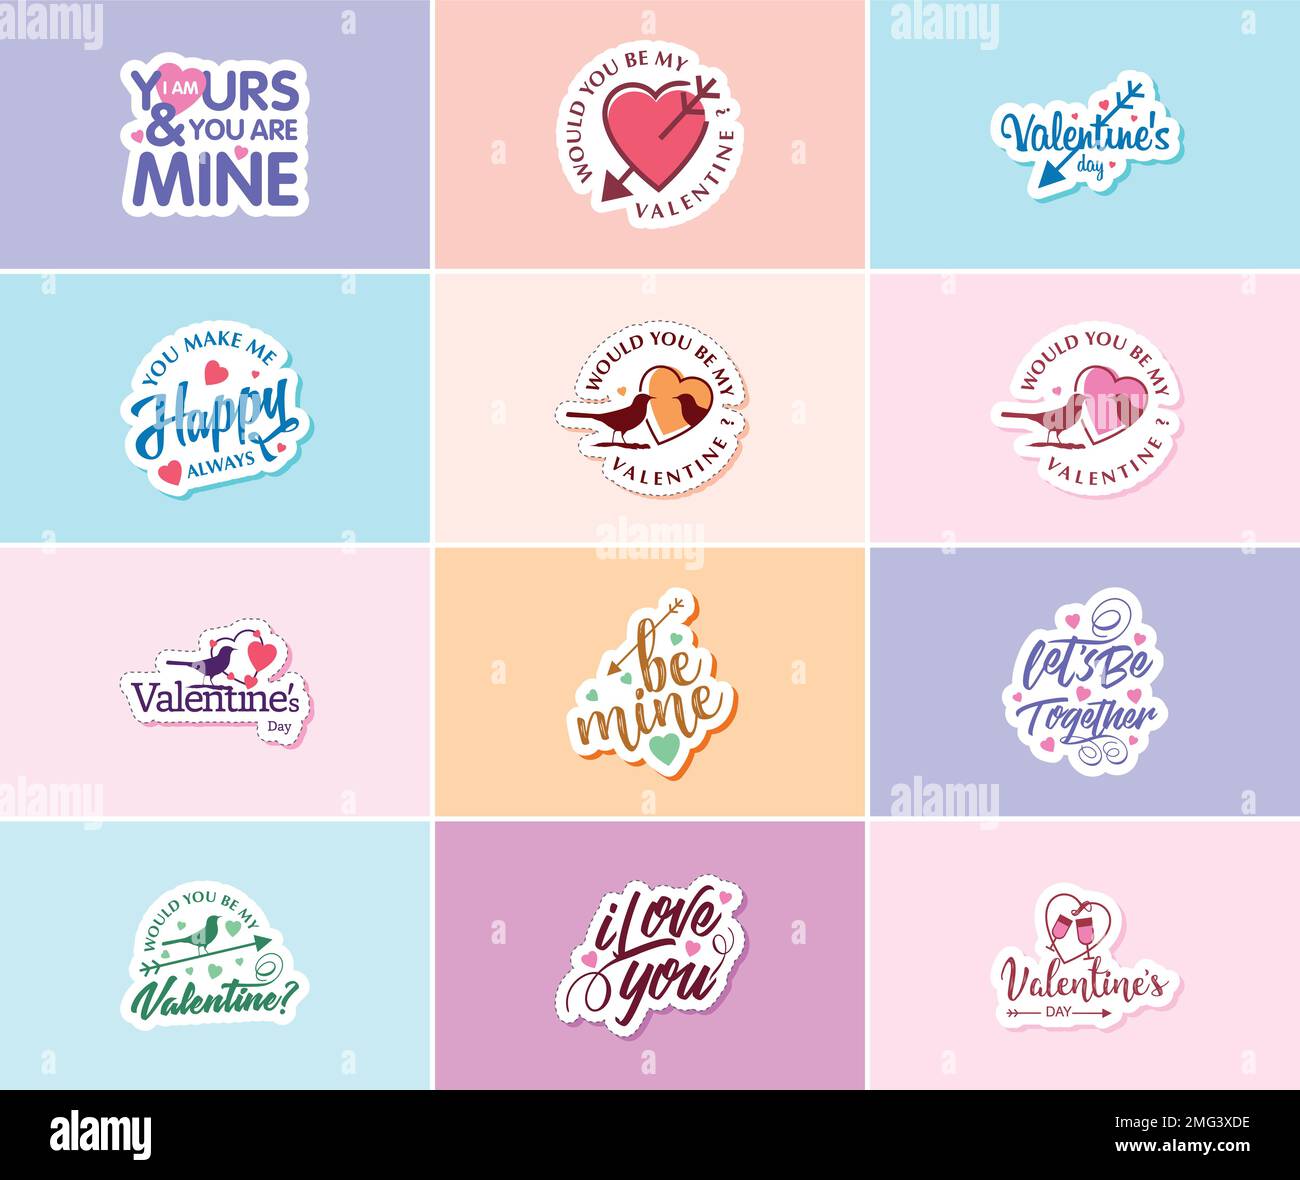 Valentine's Day: A Time for Sweet Words and Beautiful Image Stickers Stock Vector